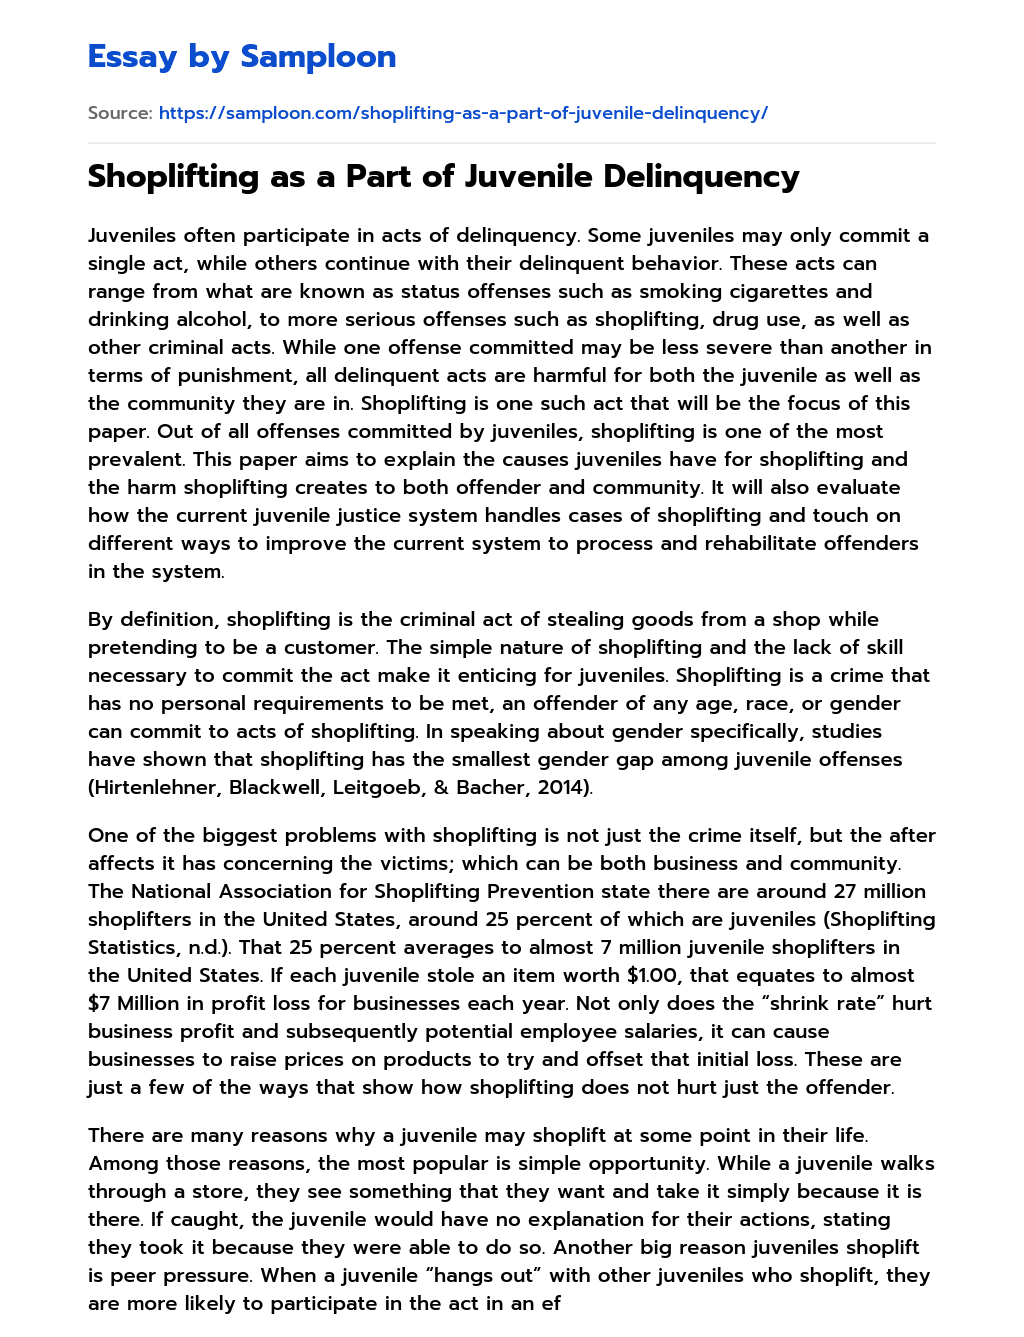 Shoplifting as a Part of Juvenile Delinquency essay